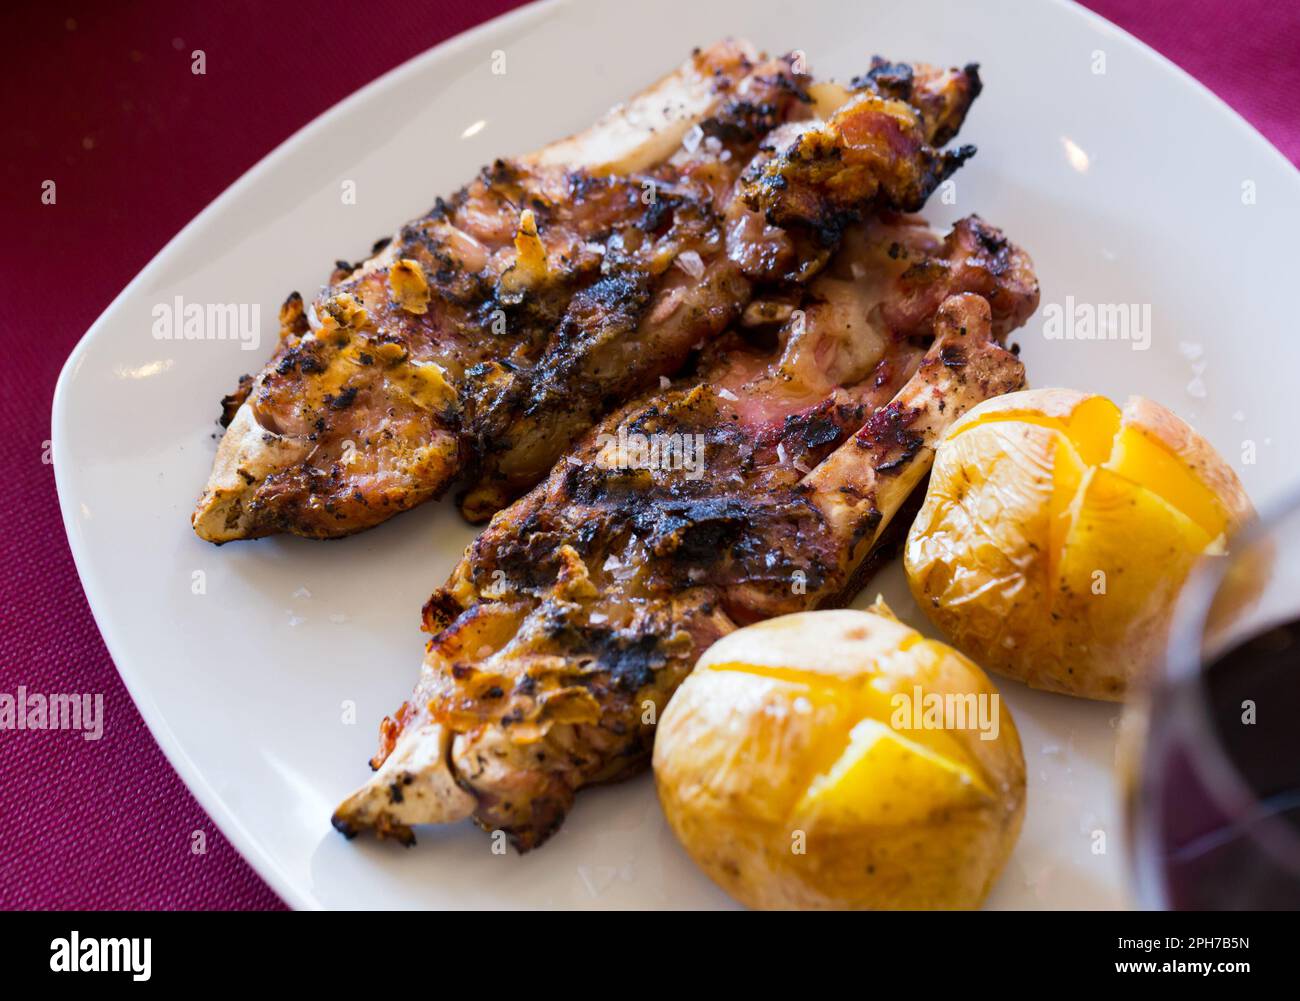 Grilled pettitoes with baked potatoes Stock Photo